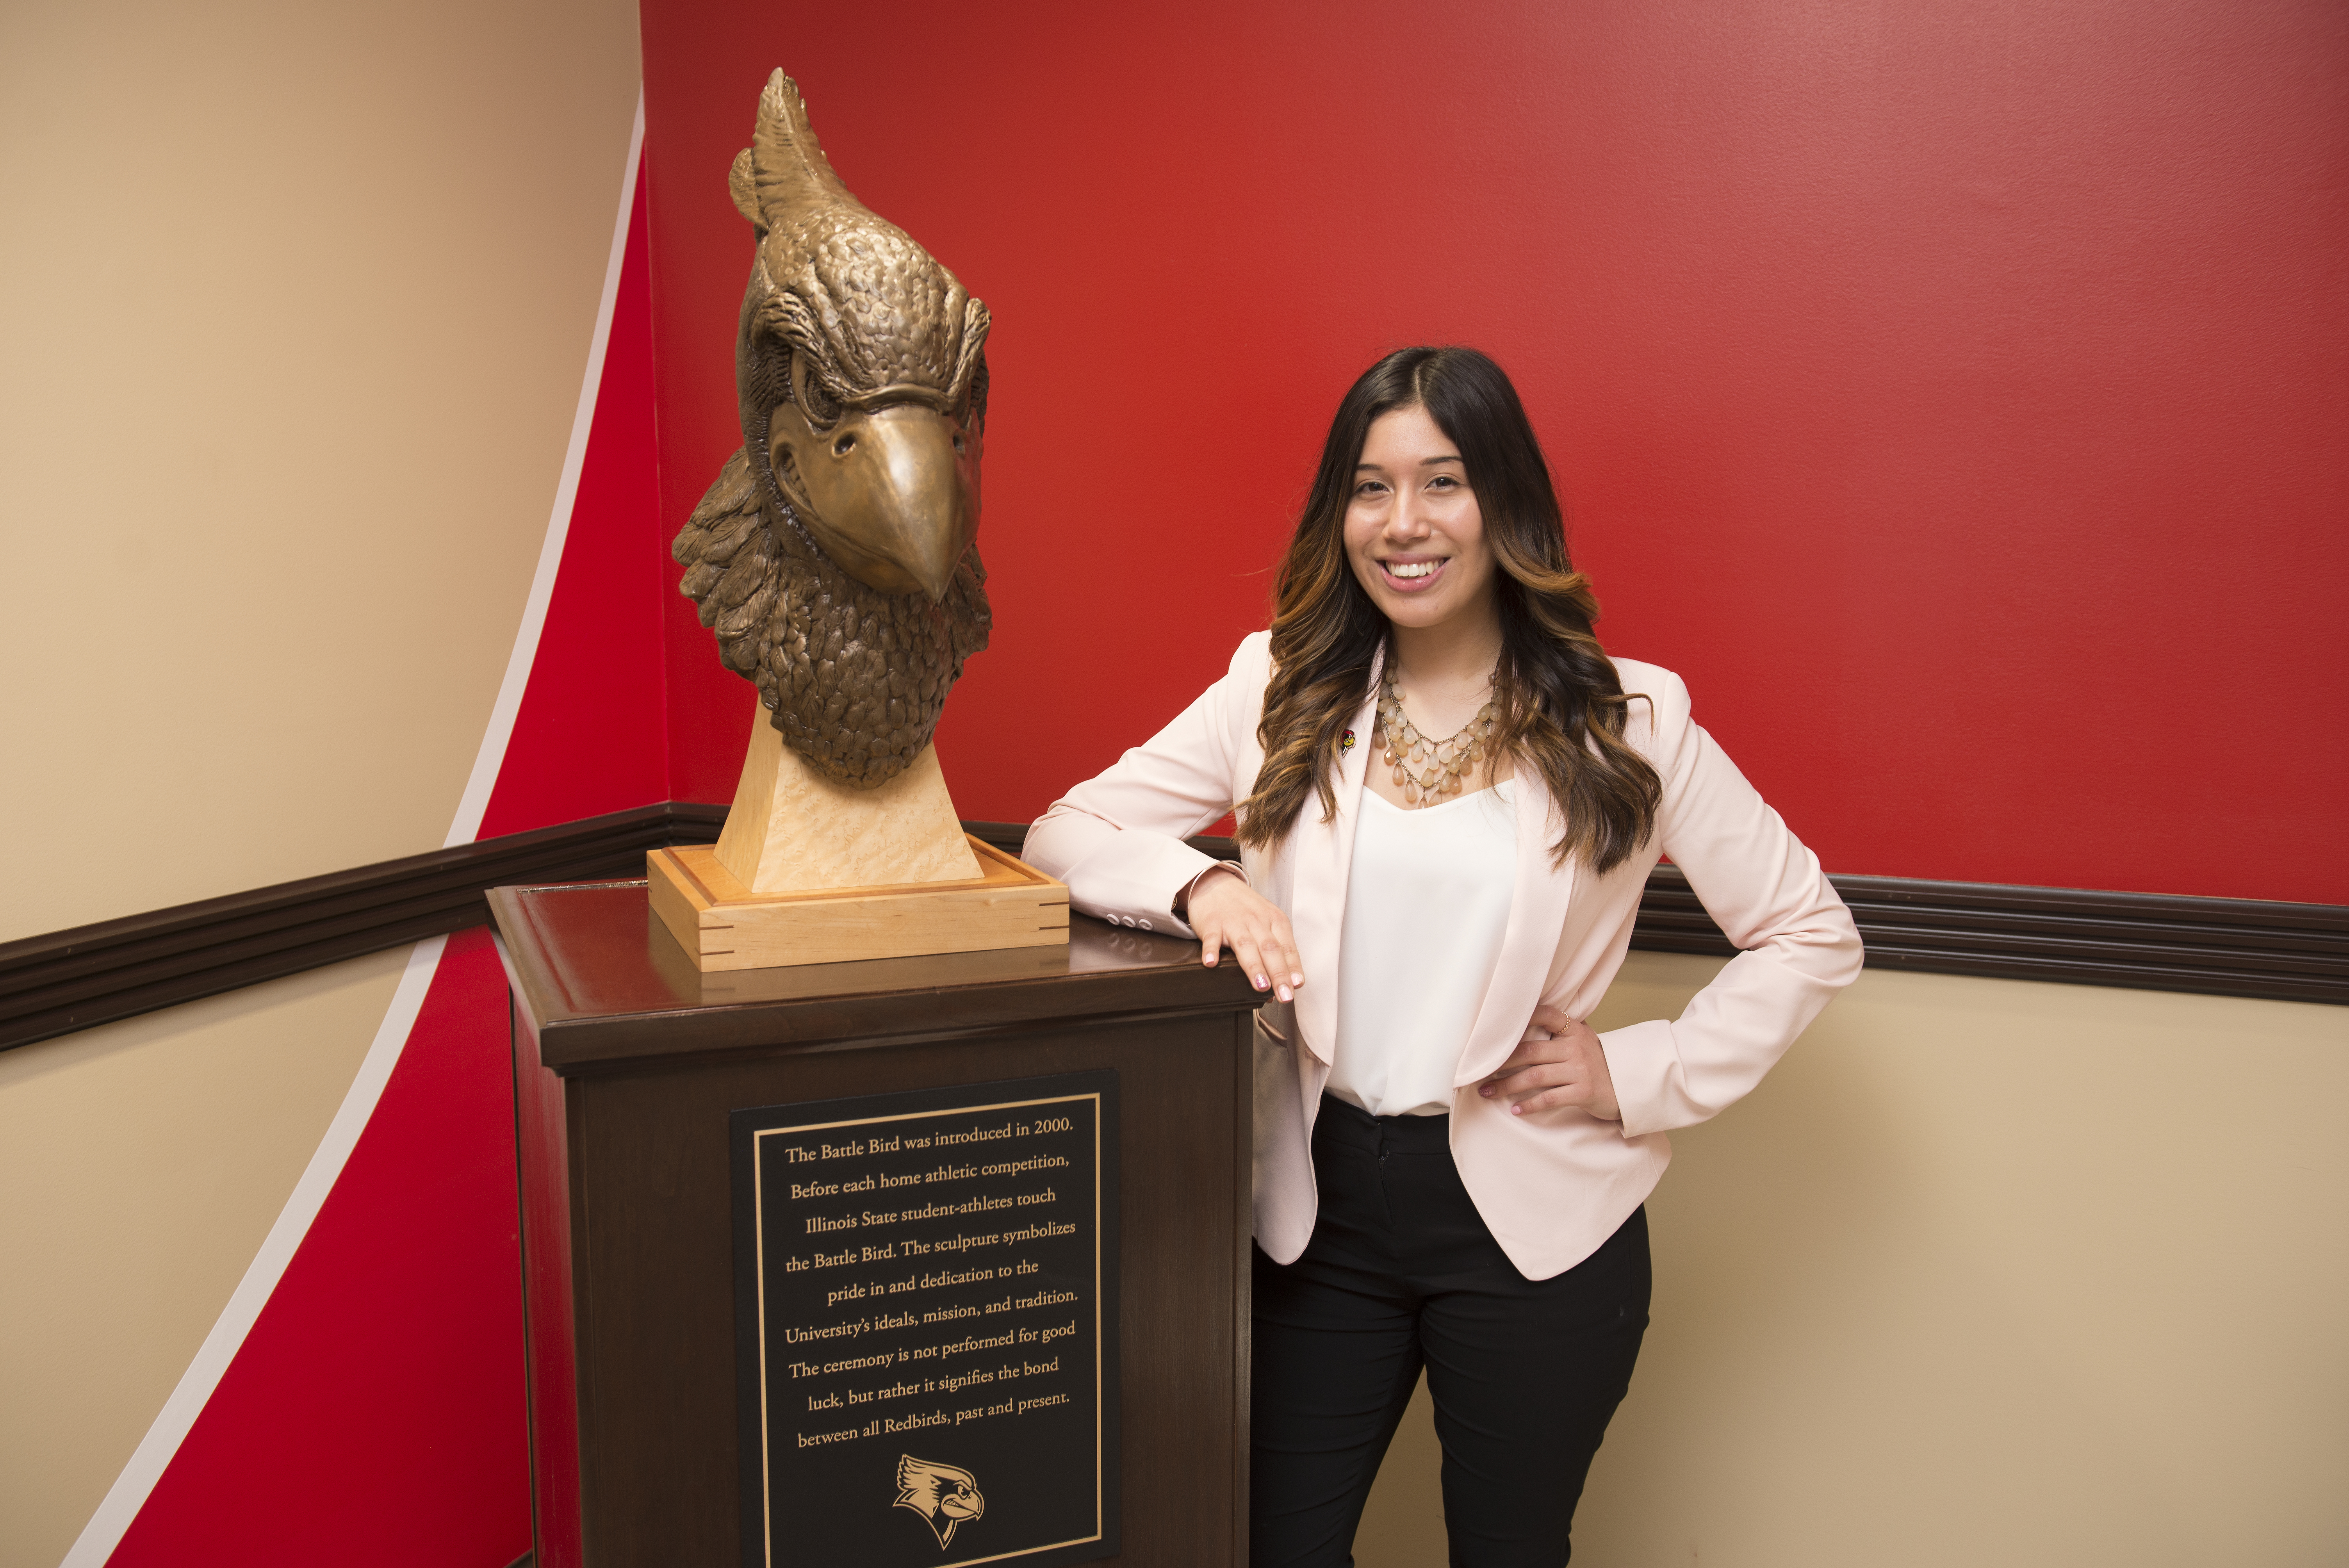 The replica Battle Bird in Hovey Hall is one option for commencement photos.